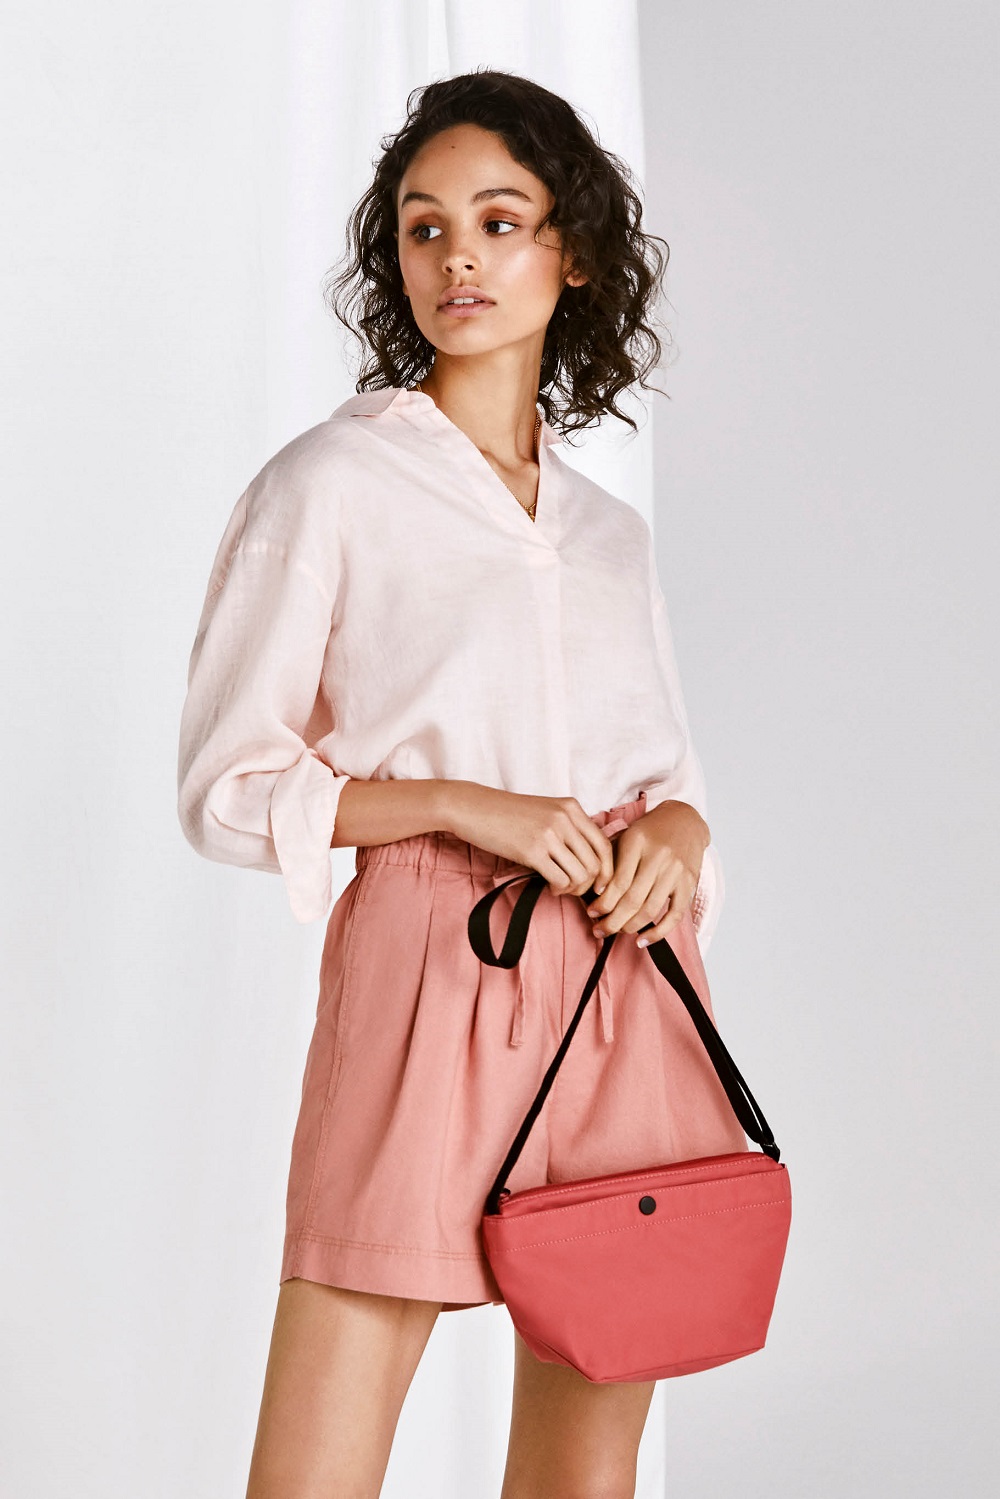 Uniqlo pink linen button-up shirt